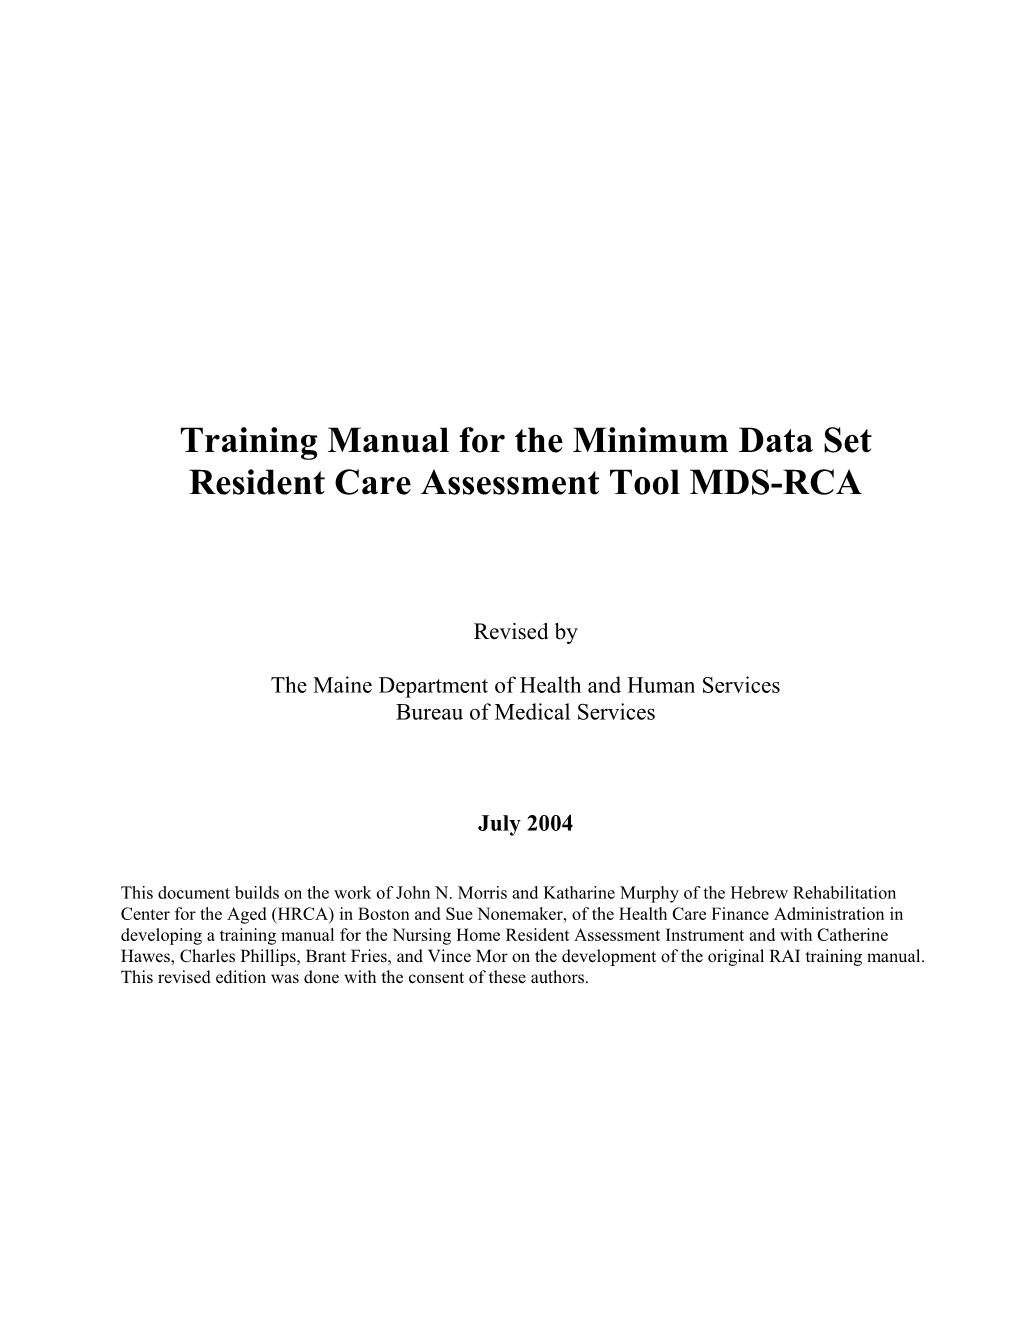 Training Manual For The Minimum Data Set Resident Care Assessment Tool MDS-RCA